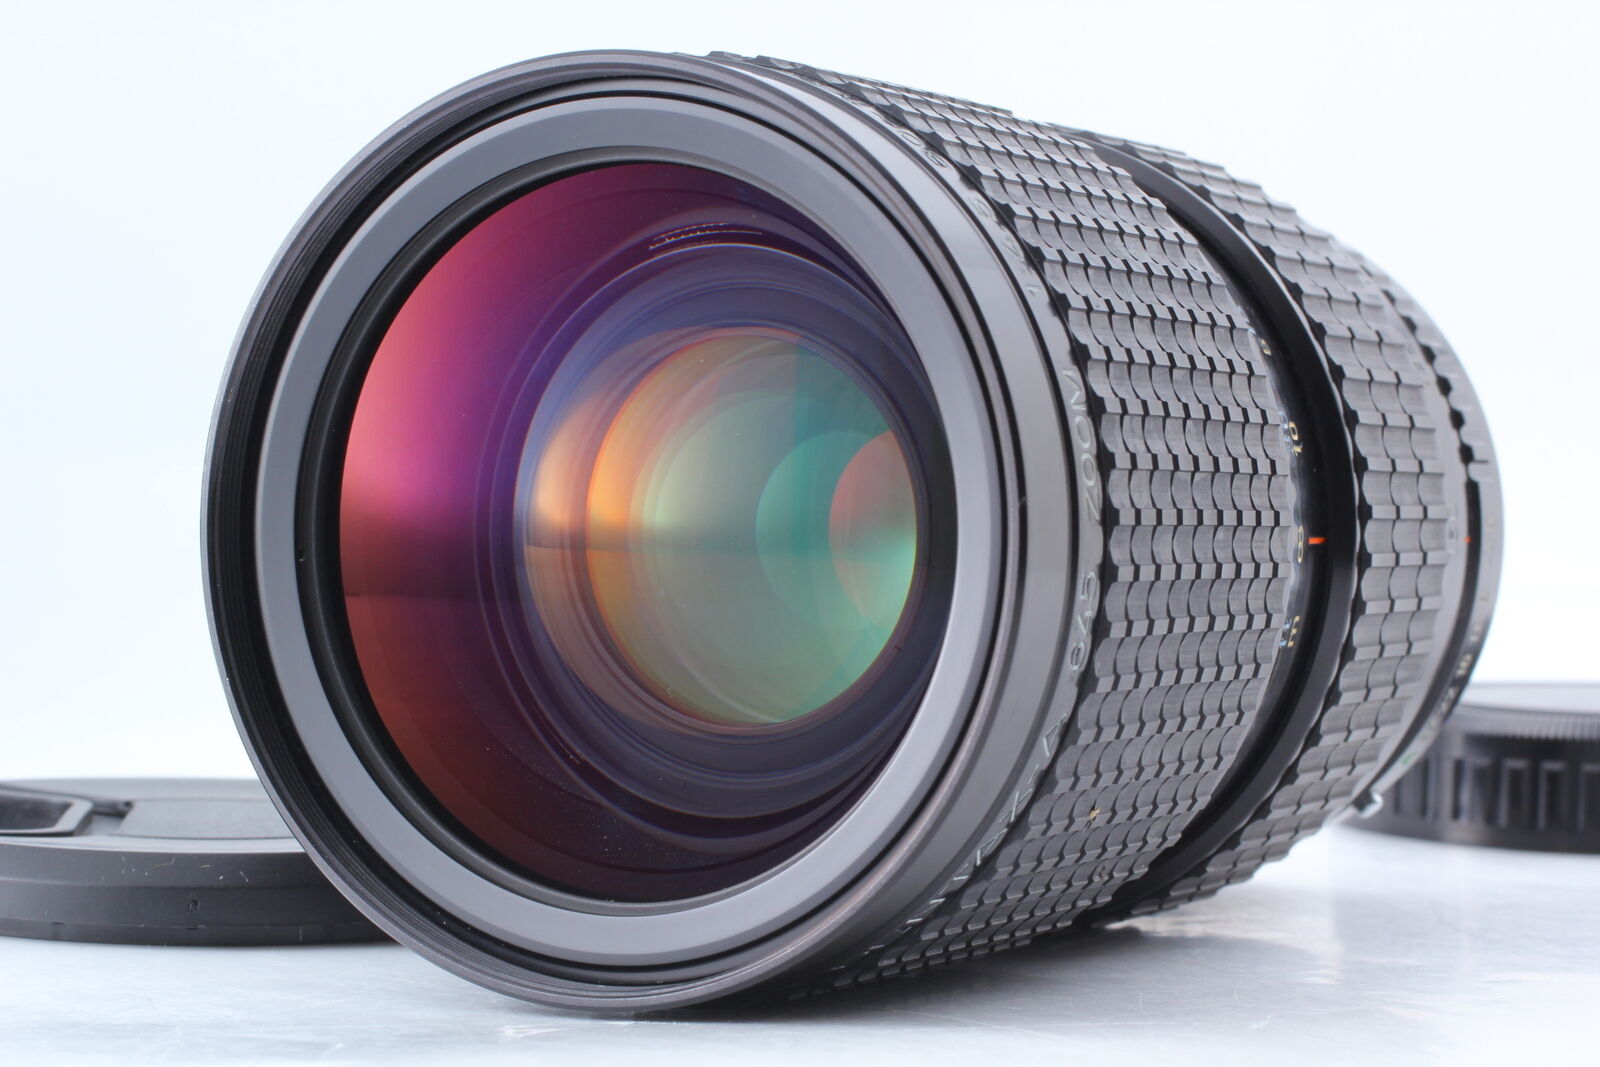 Exc+5] SMC PENTAX-A 645 80-160mm F4.5 Zoom Lens For Pentax 645 N 